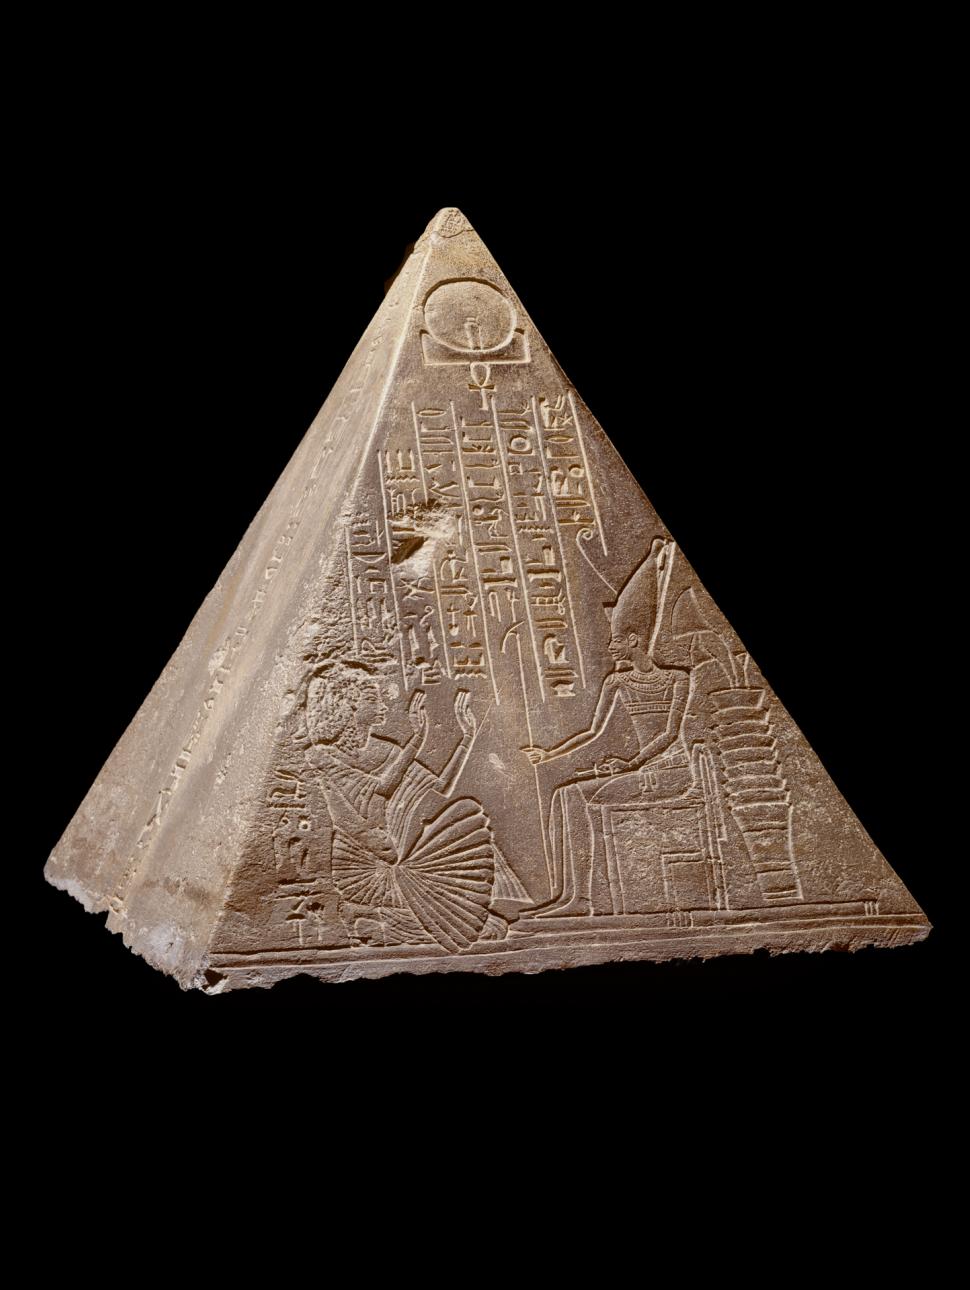 Sandy colouted pyramid artefact with markings, drawings and inscriptions 